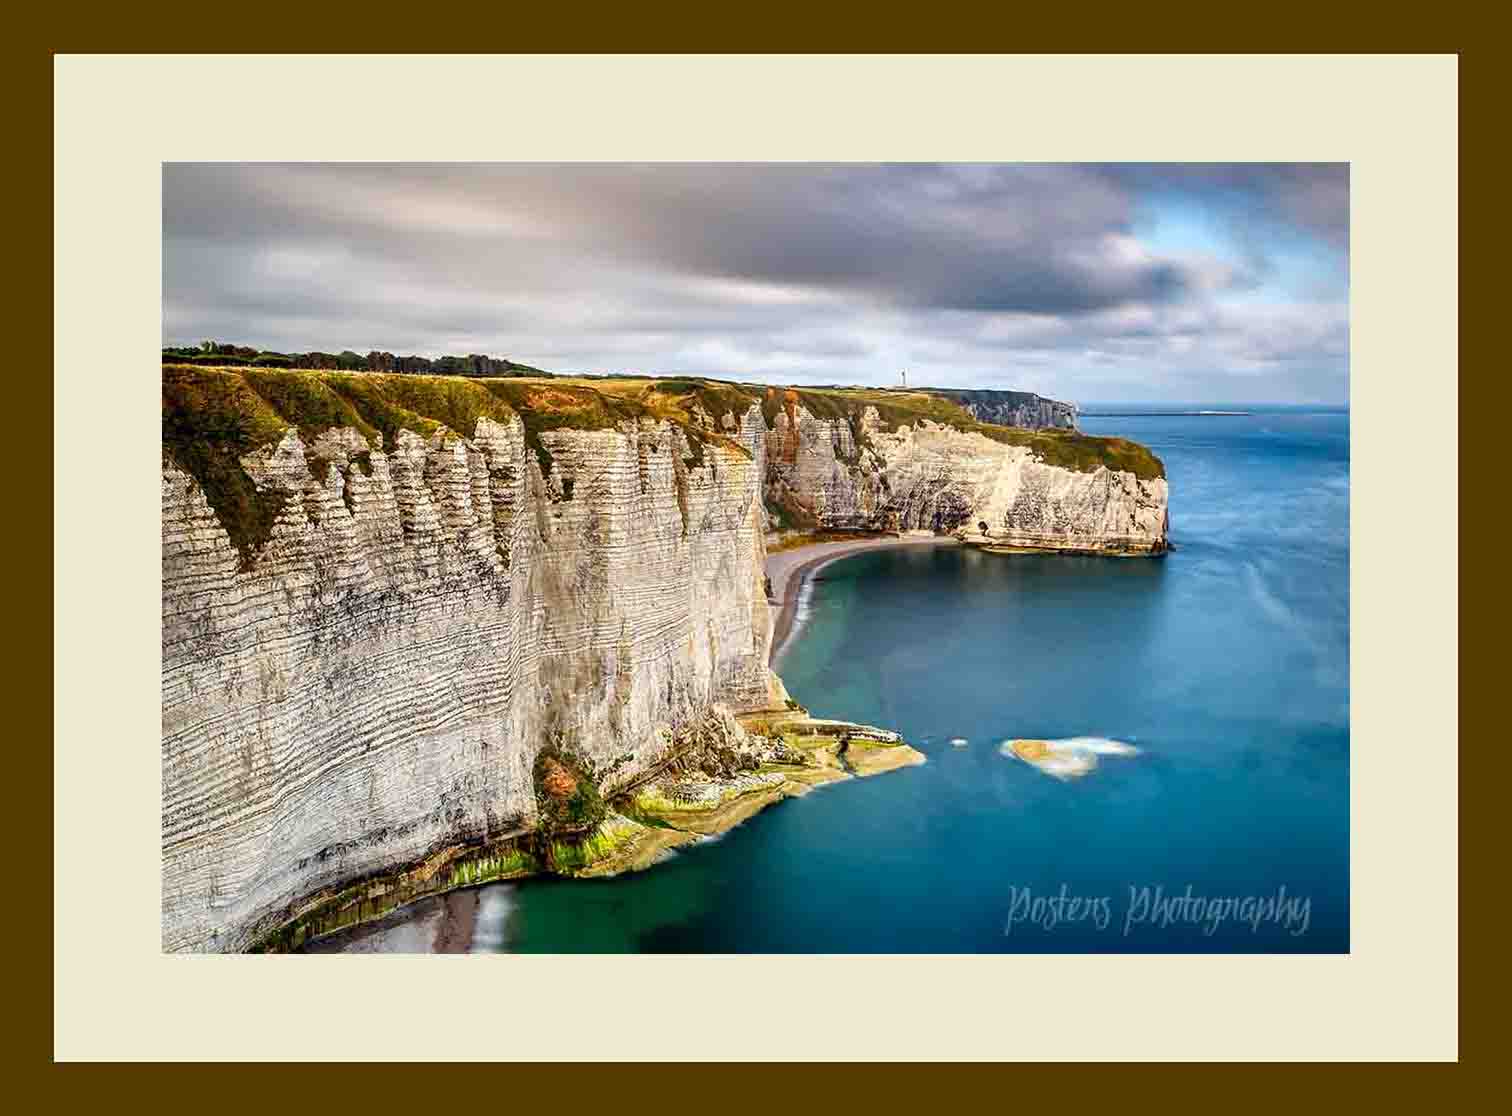 The White Cliffs of Etretat - PostersPhotography